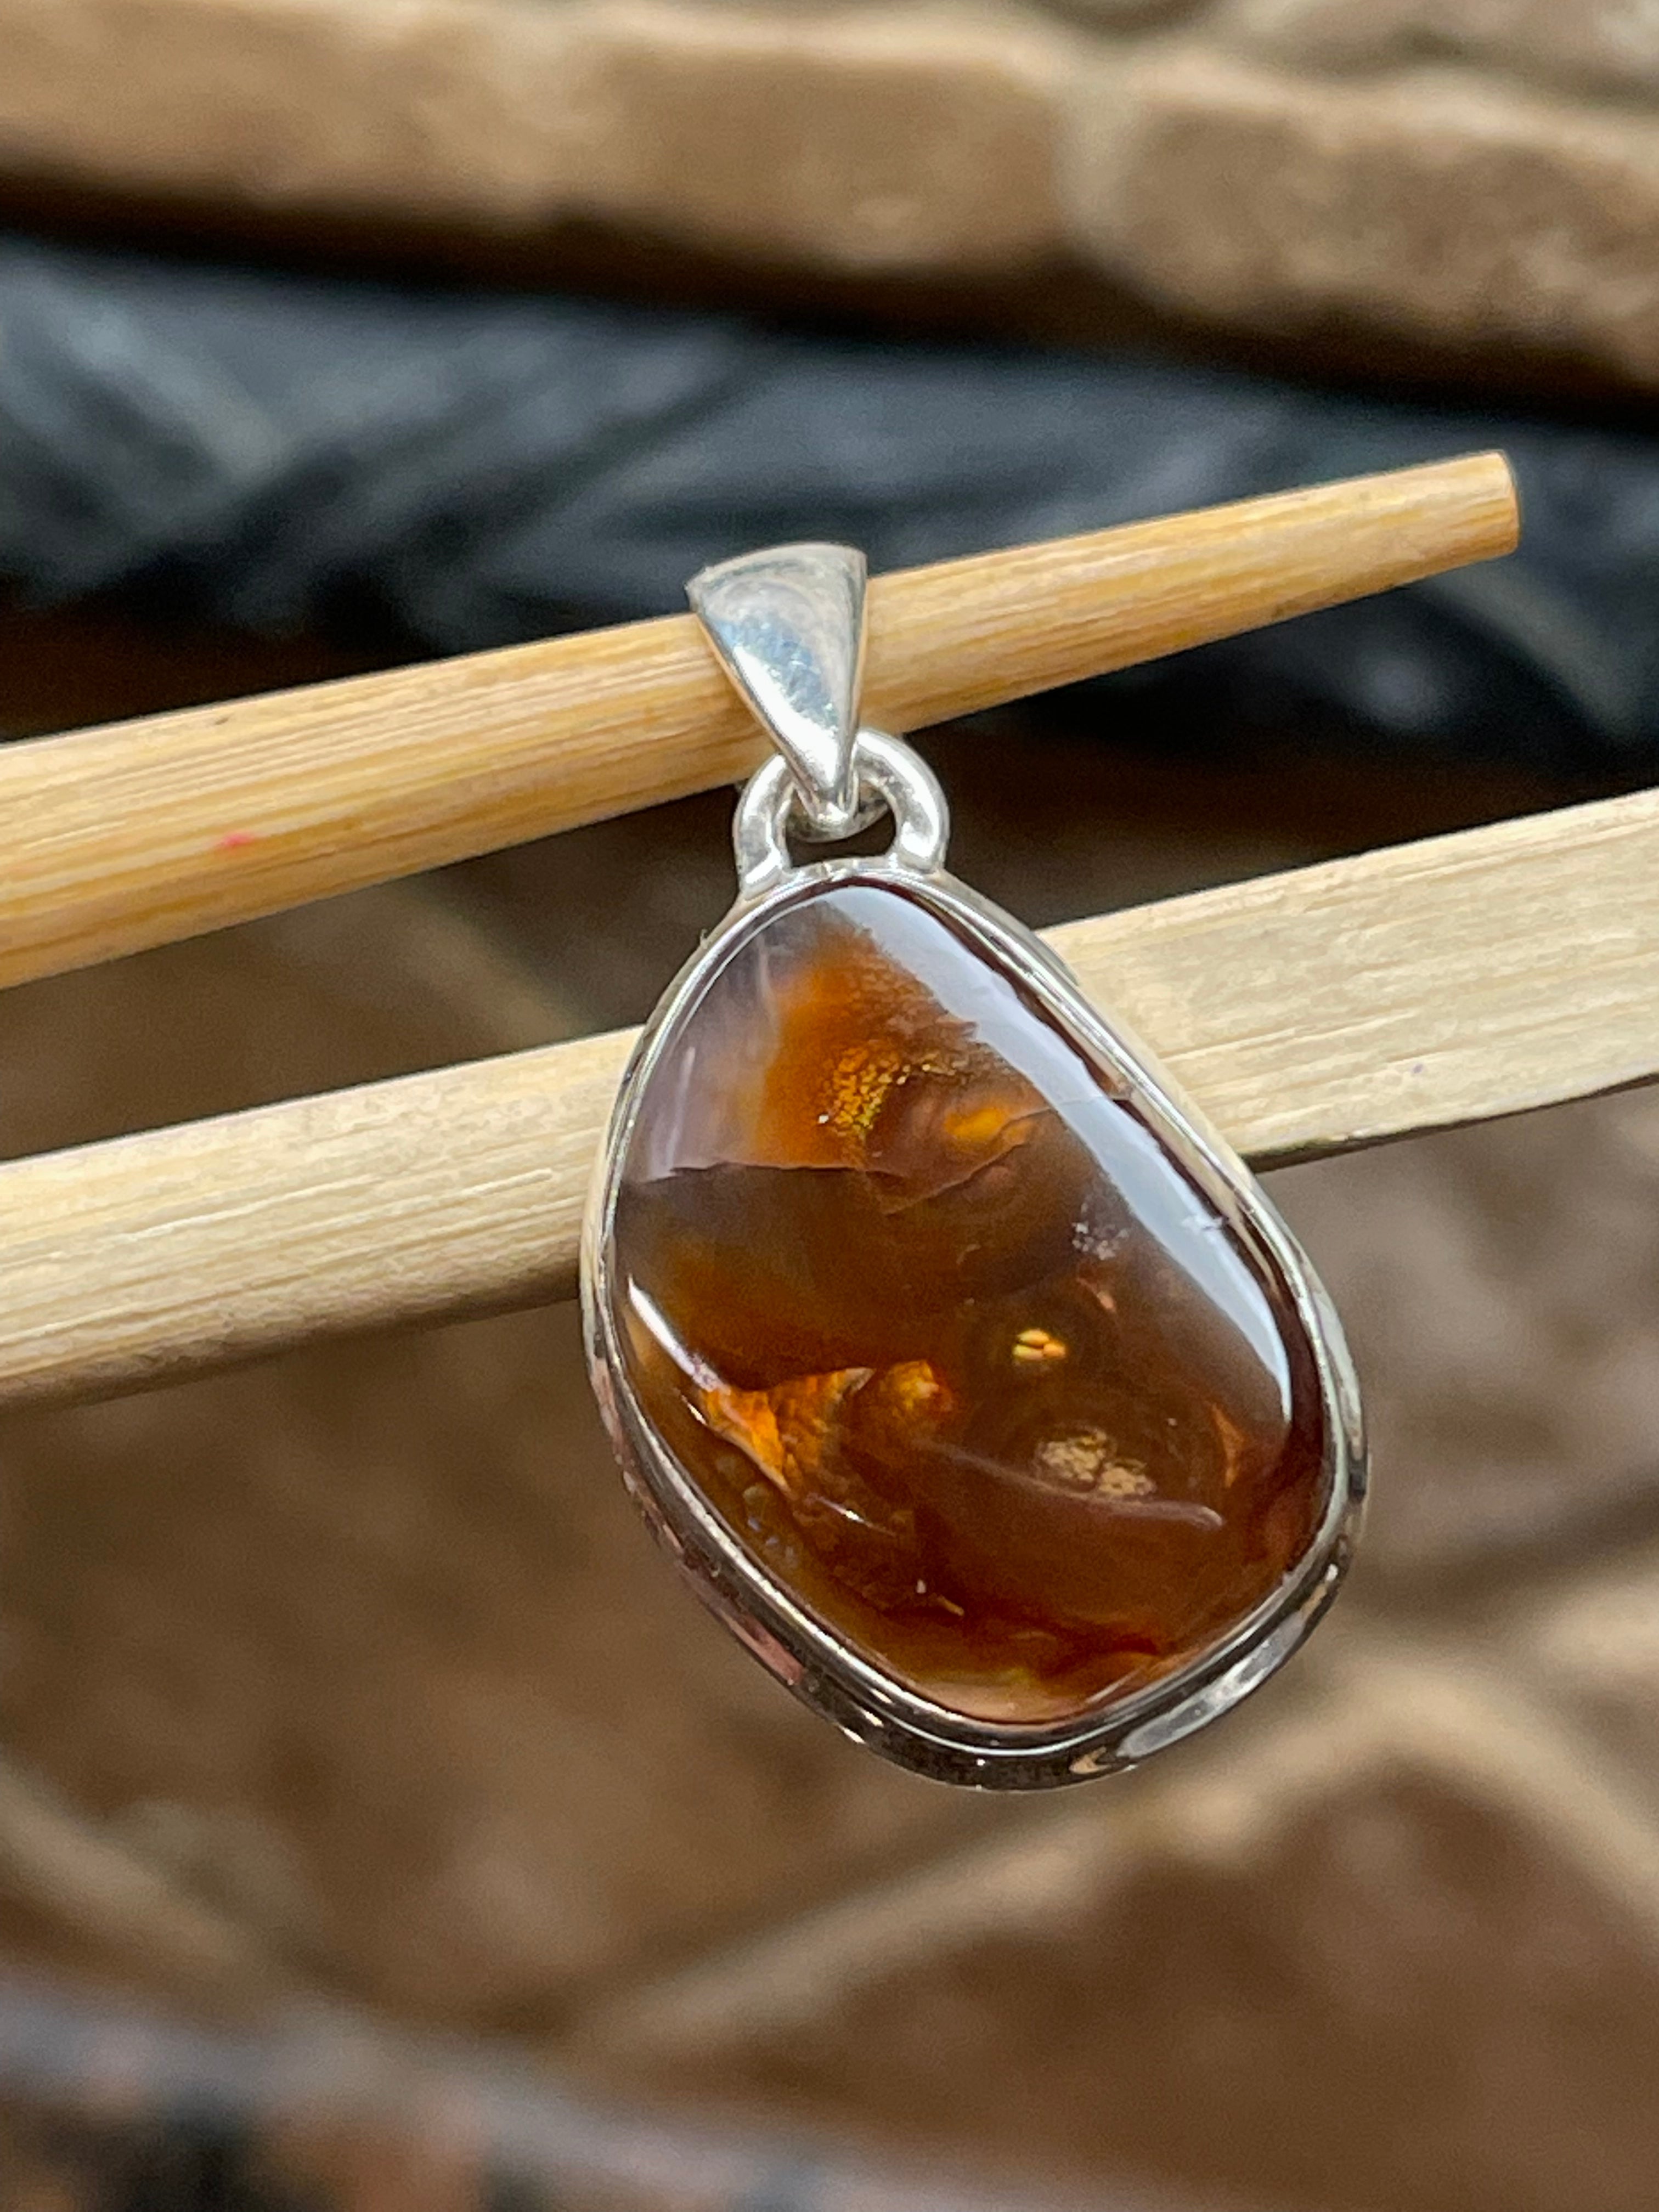 Genuine Mexican Fire Agate 925 Solid Sterling Silver Pendant 30mm - Natural Rocks by Kala